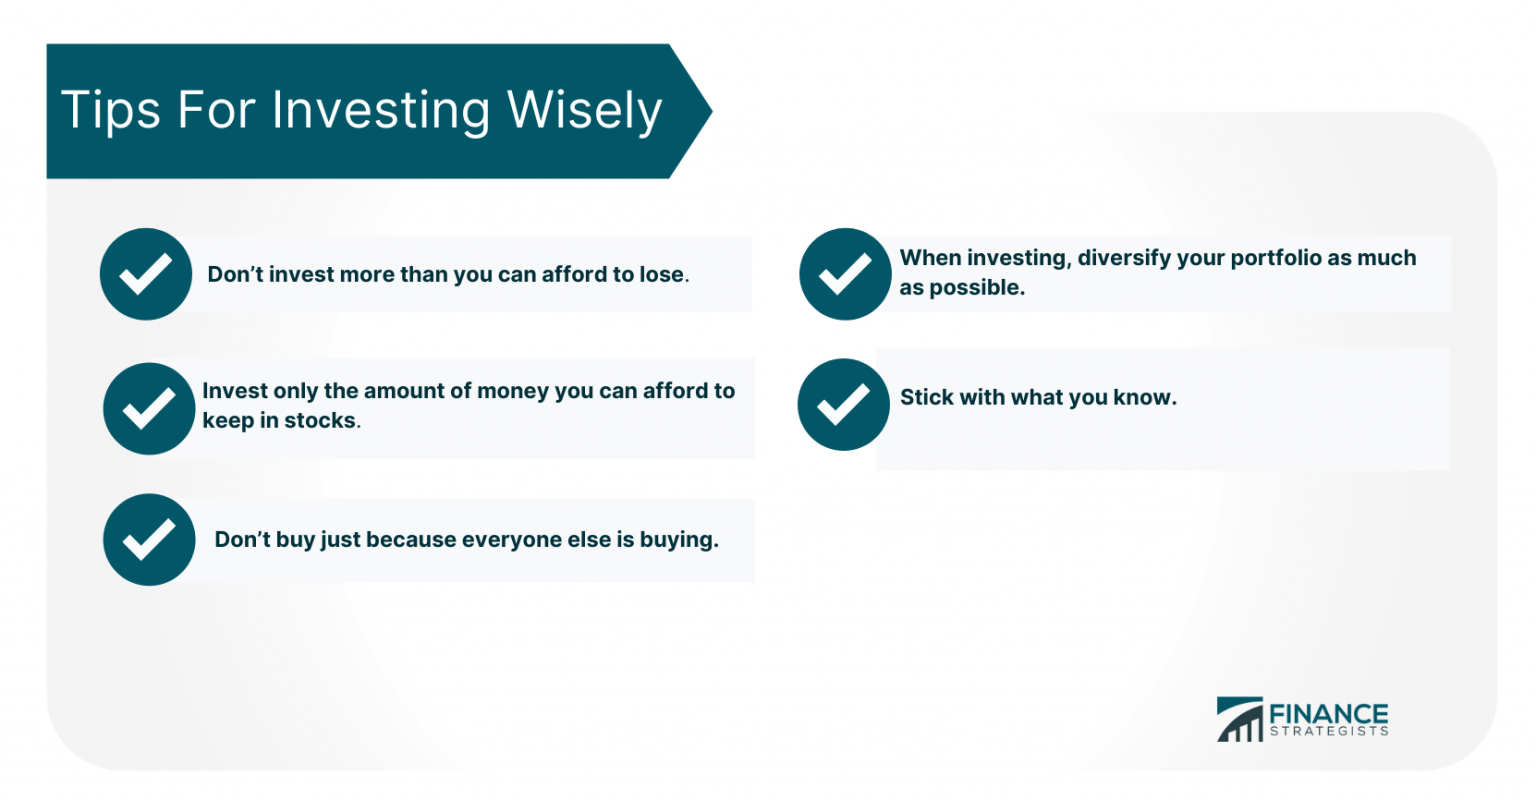  A checklist of tips for investing wisely, including: don't invest more than you can afford to lose, diversify your portfolio, stick with what you know, and don't buy just because everyone else is.